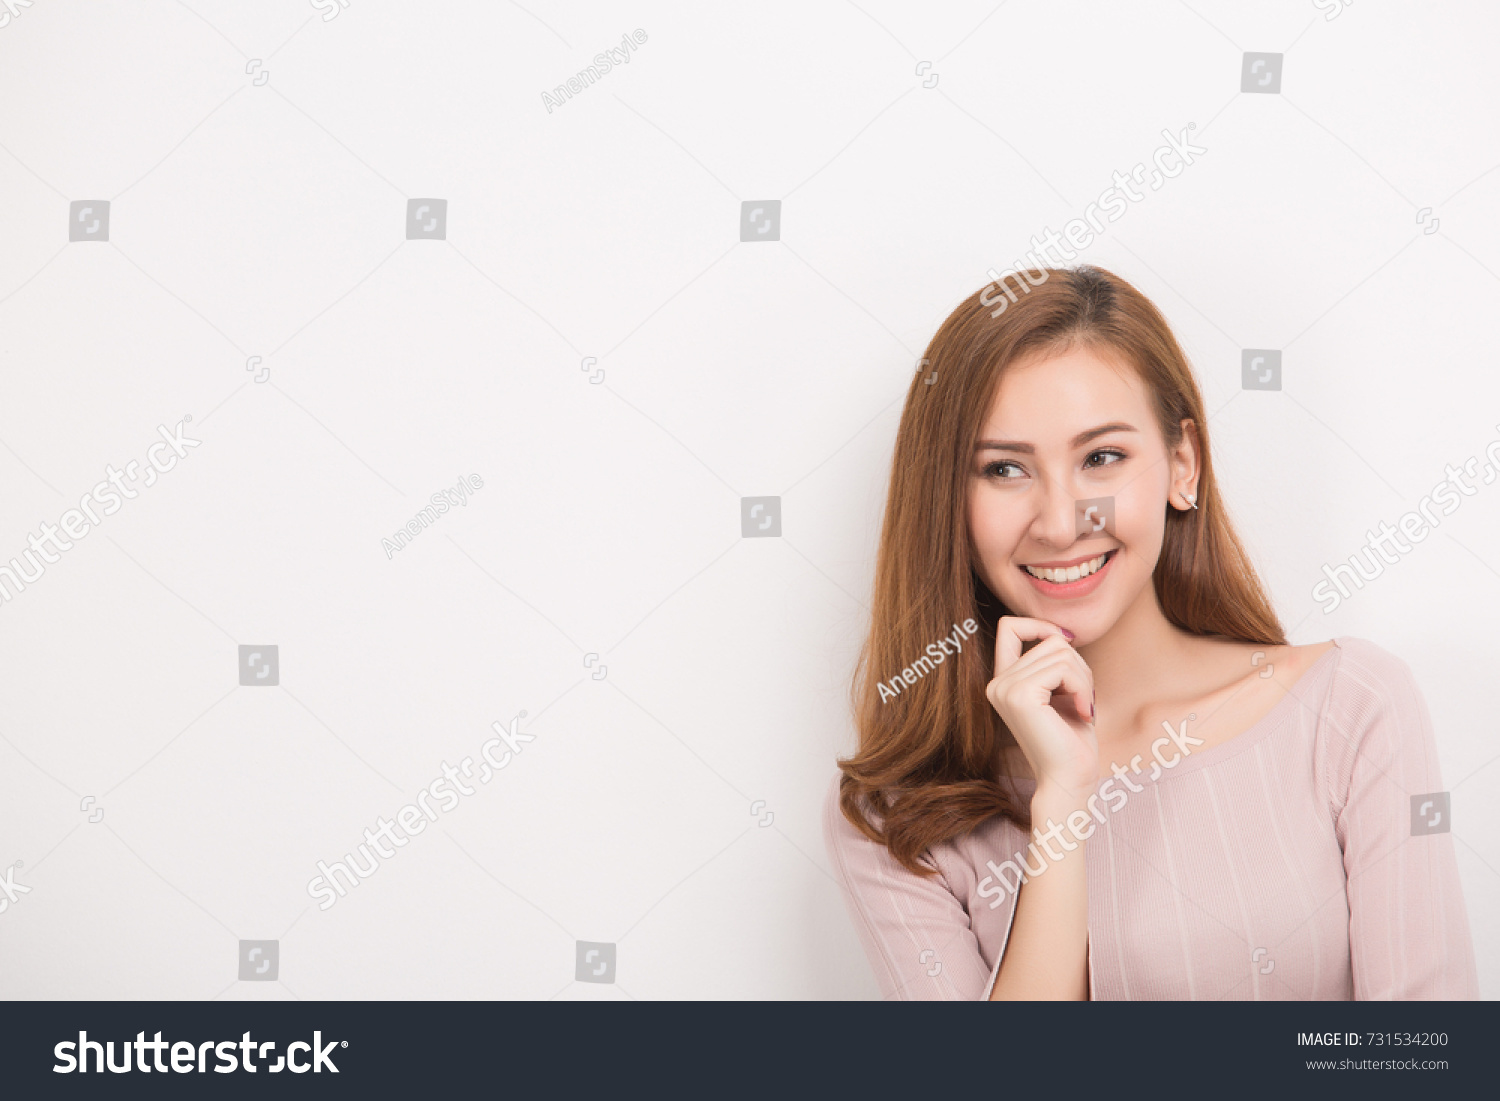 Young happy woman portrait . isolated on white background #731534200